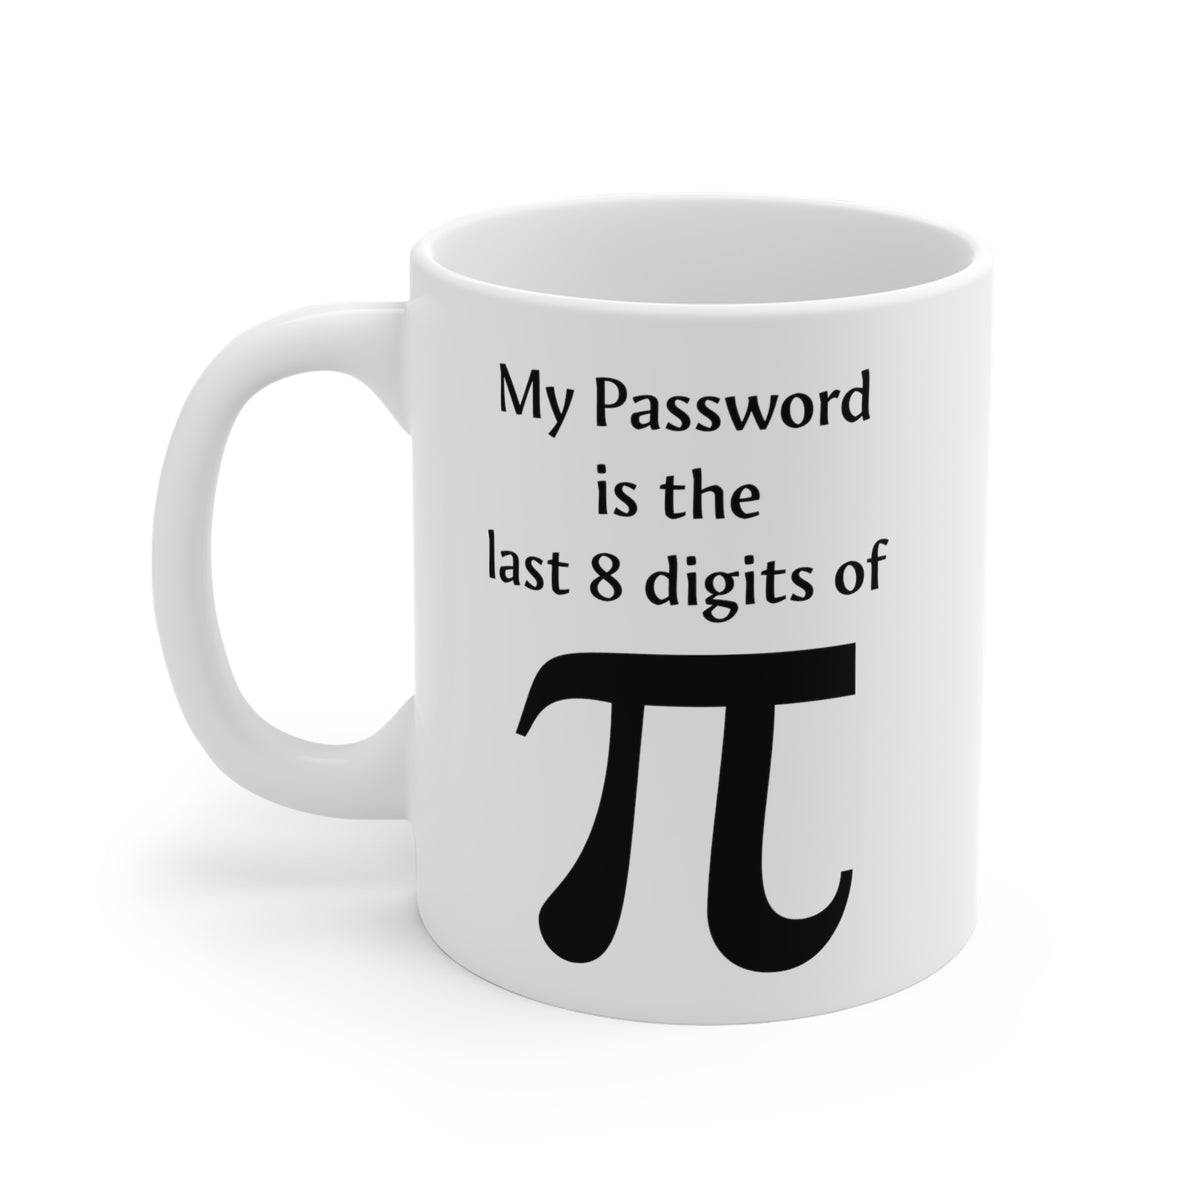 Funny Equation Coffee Mug - My Password is the last 8 digits of Pi Cup - Fun Gifts for Math Teacher